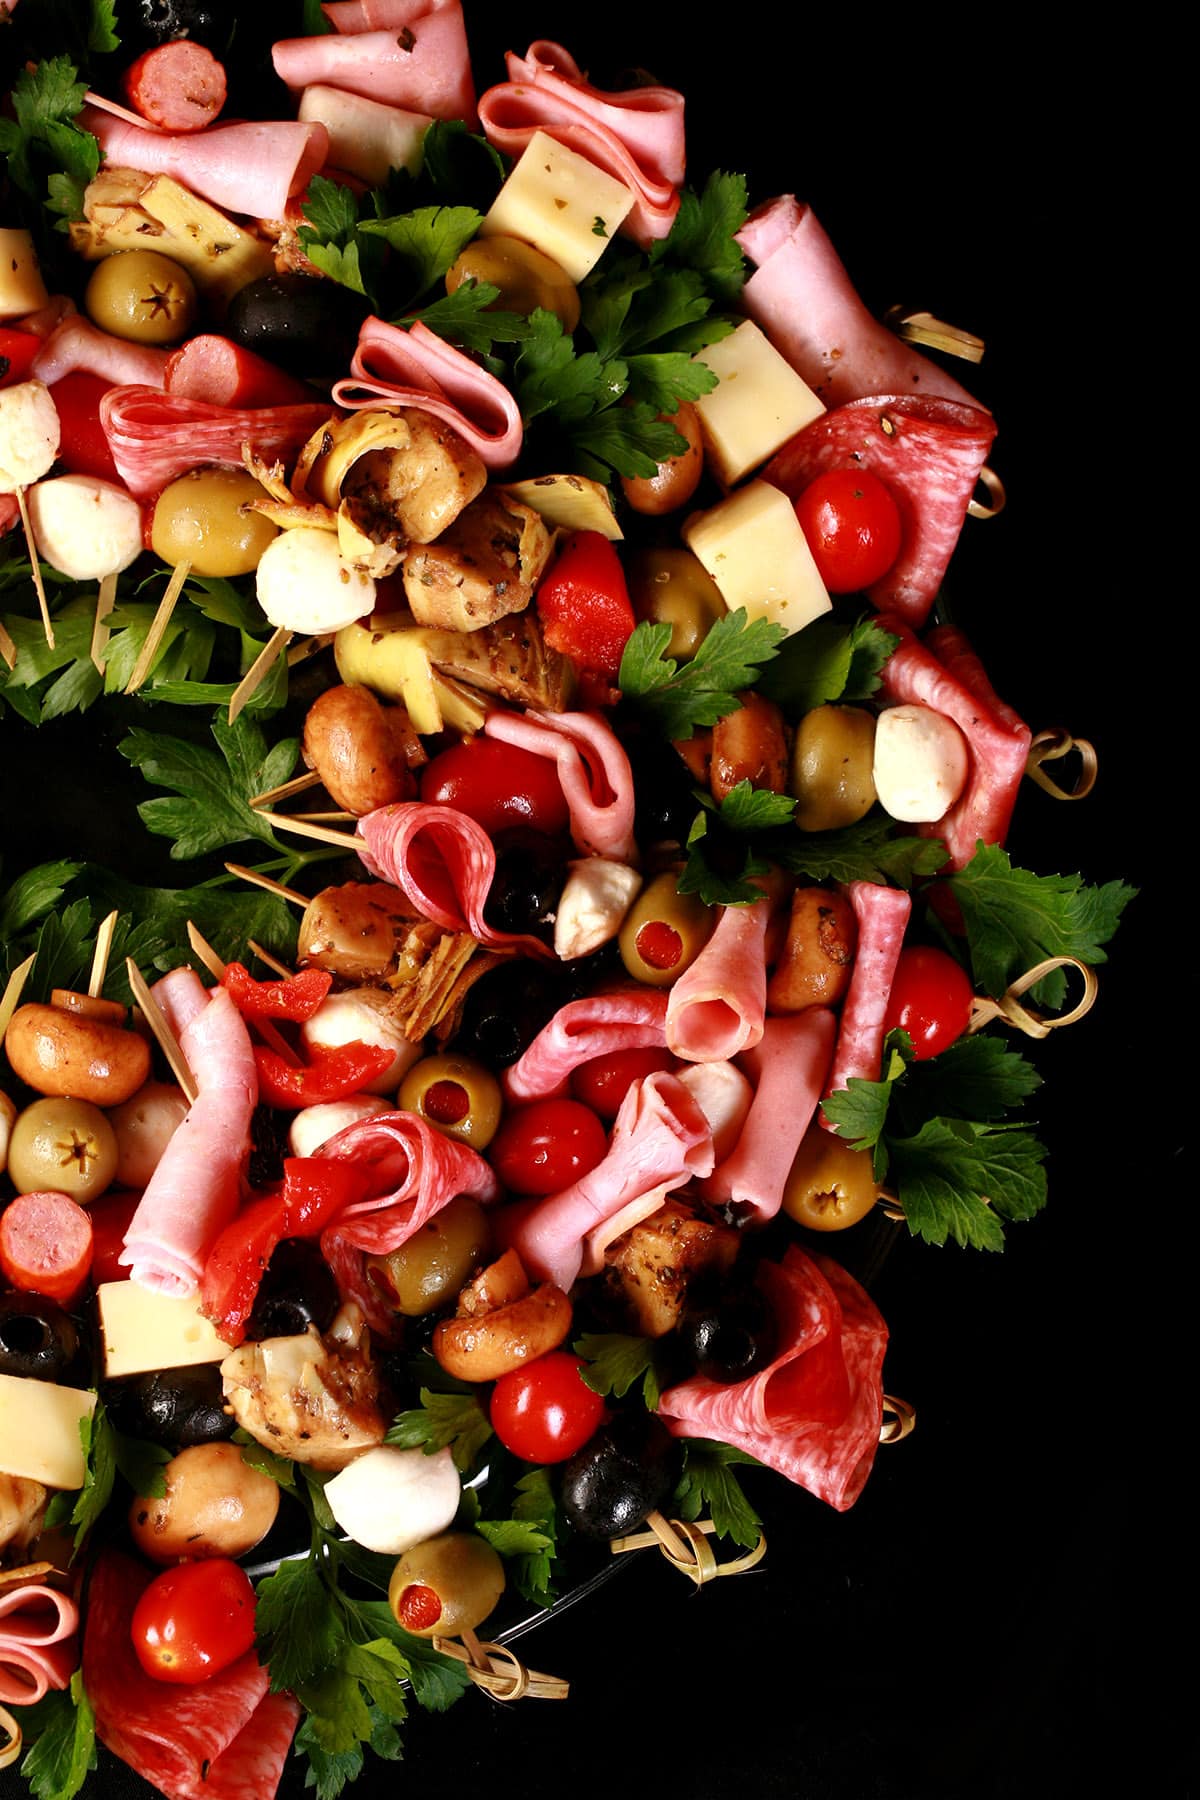 A charcuterie wreath, made up of antipasto skewers featuring various meats, cheeses, and olives.